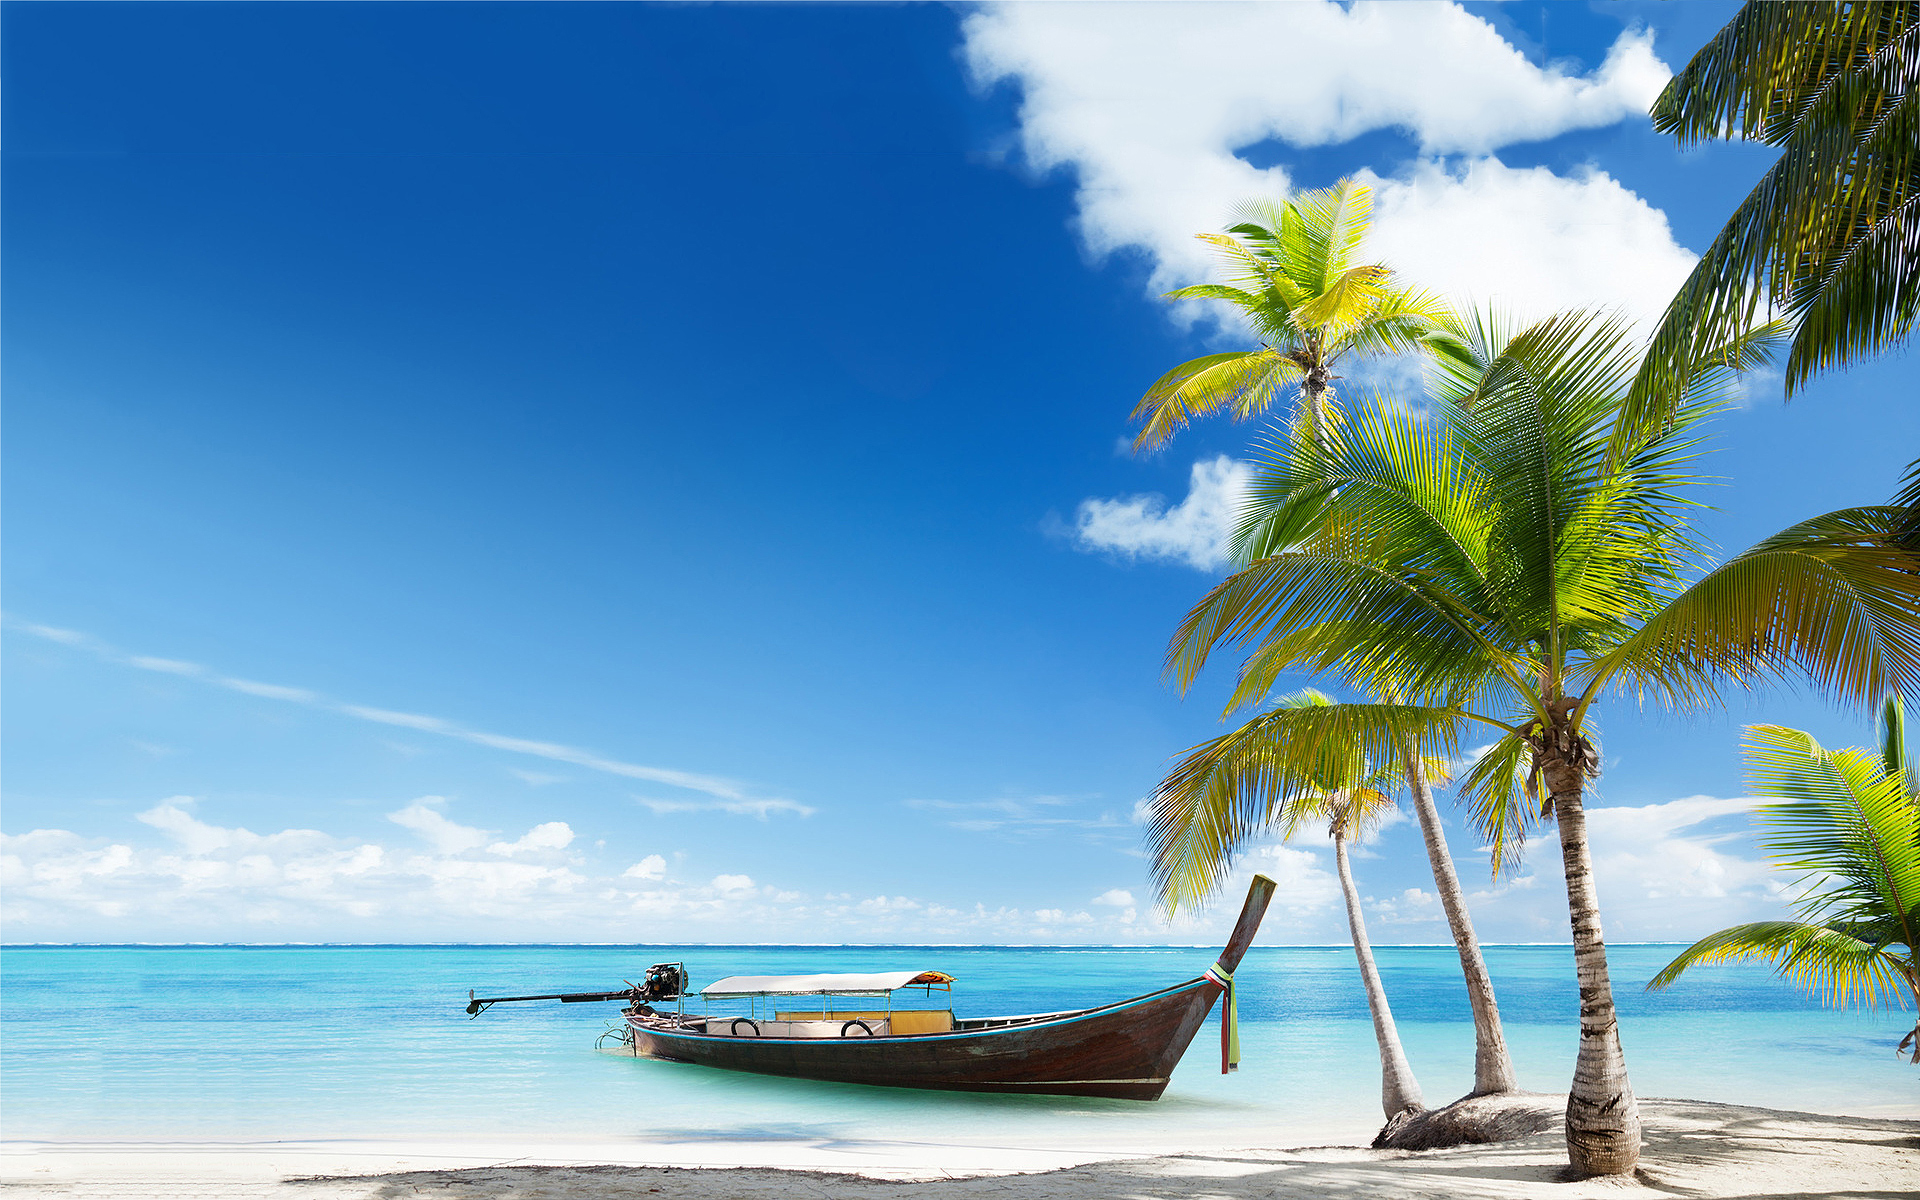 Boat Tropical Beach Wallpaper Pictures Photos Image